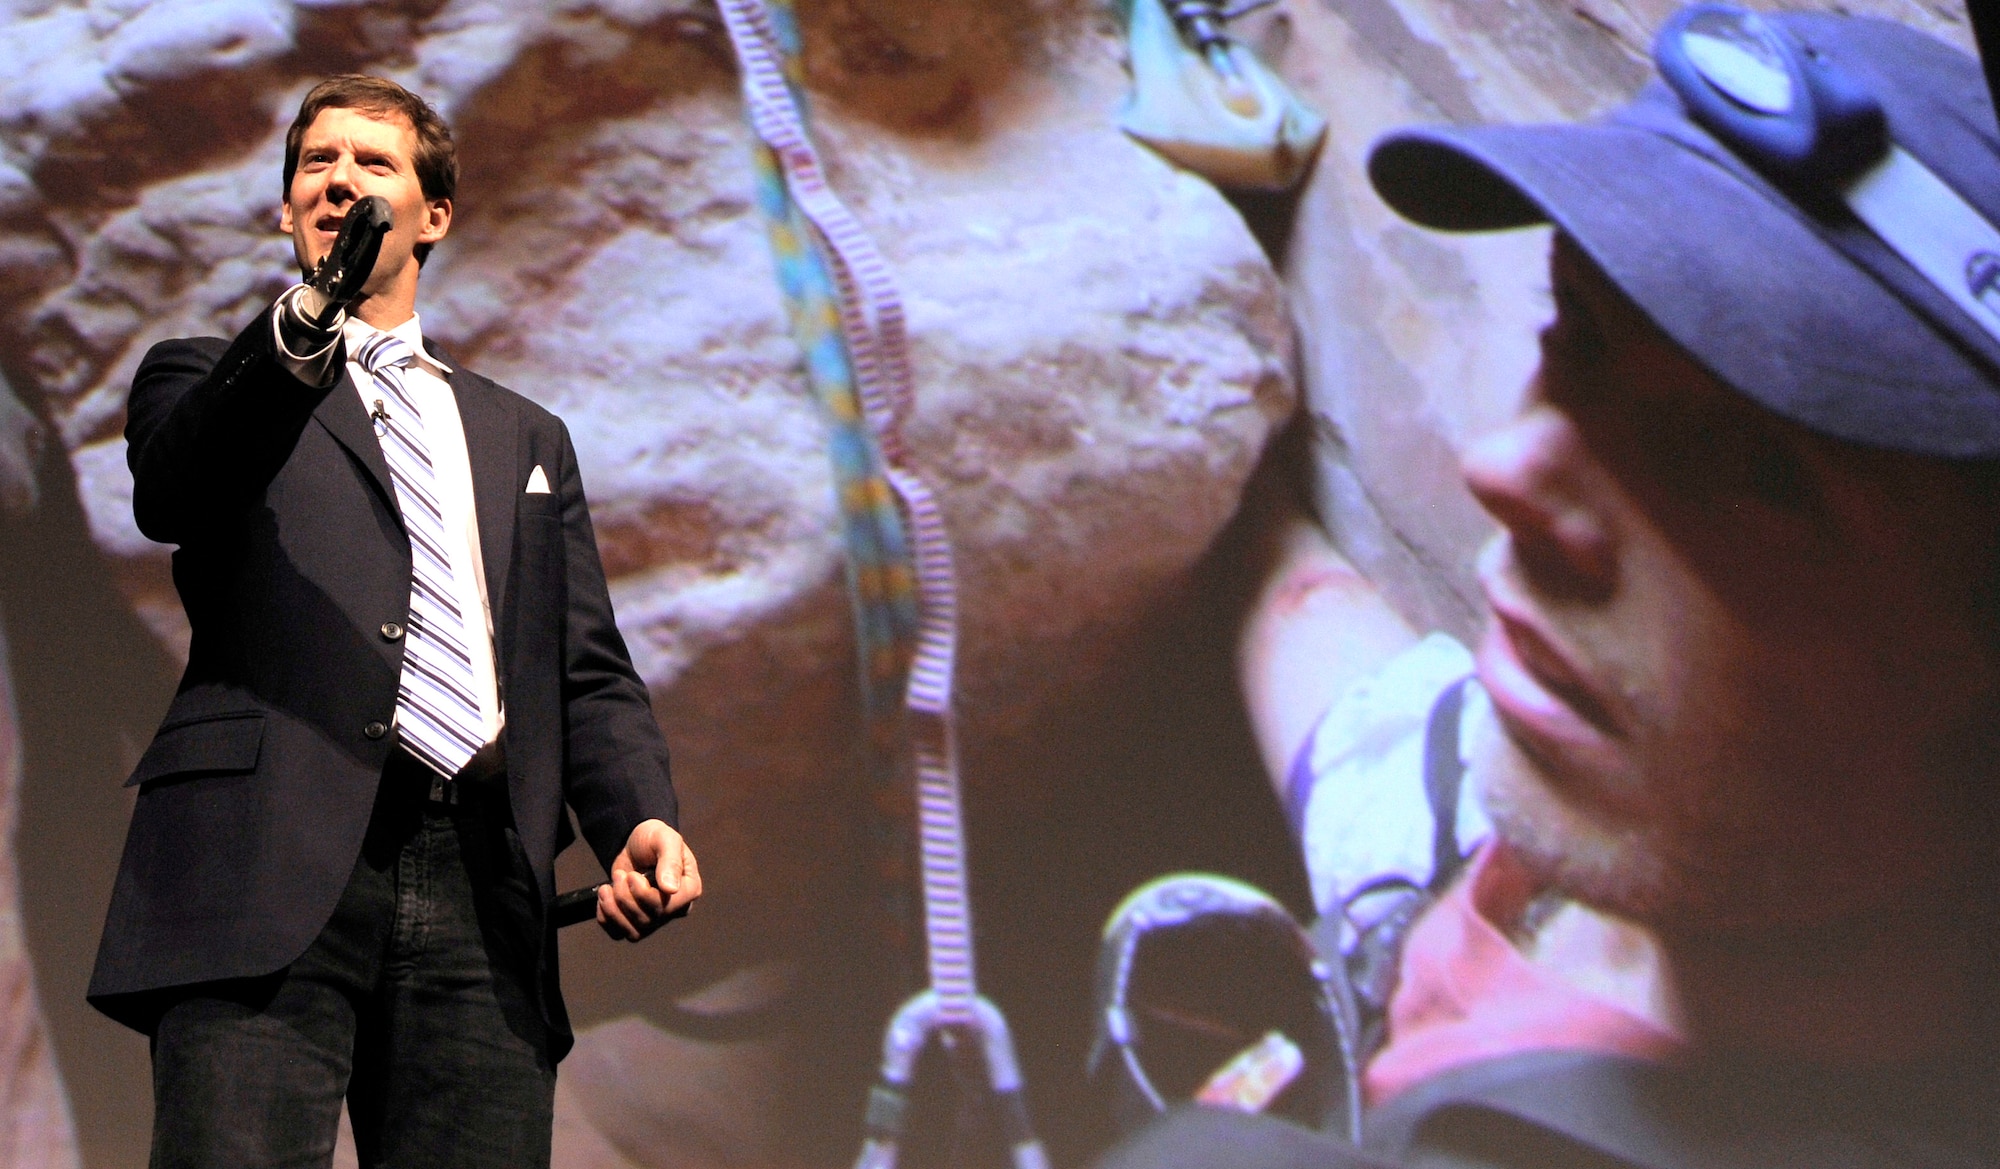 Aron Ralston speaks to an audience in the Air Force Academy's Arnold Hall Theater during the National Character and Leadership Symposium Feb. 24, 2012. Ralston, the subject of the film "127 Hours," amputated his own right arm to save his life after a mountain-climbing accident in Utah in 2003. (U.S. Air Force photo/Mike Kaplan)